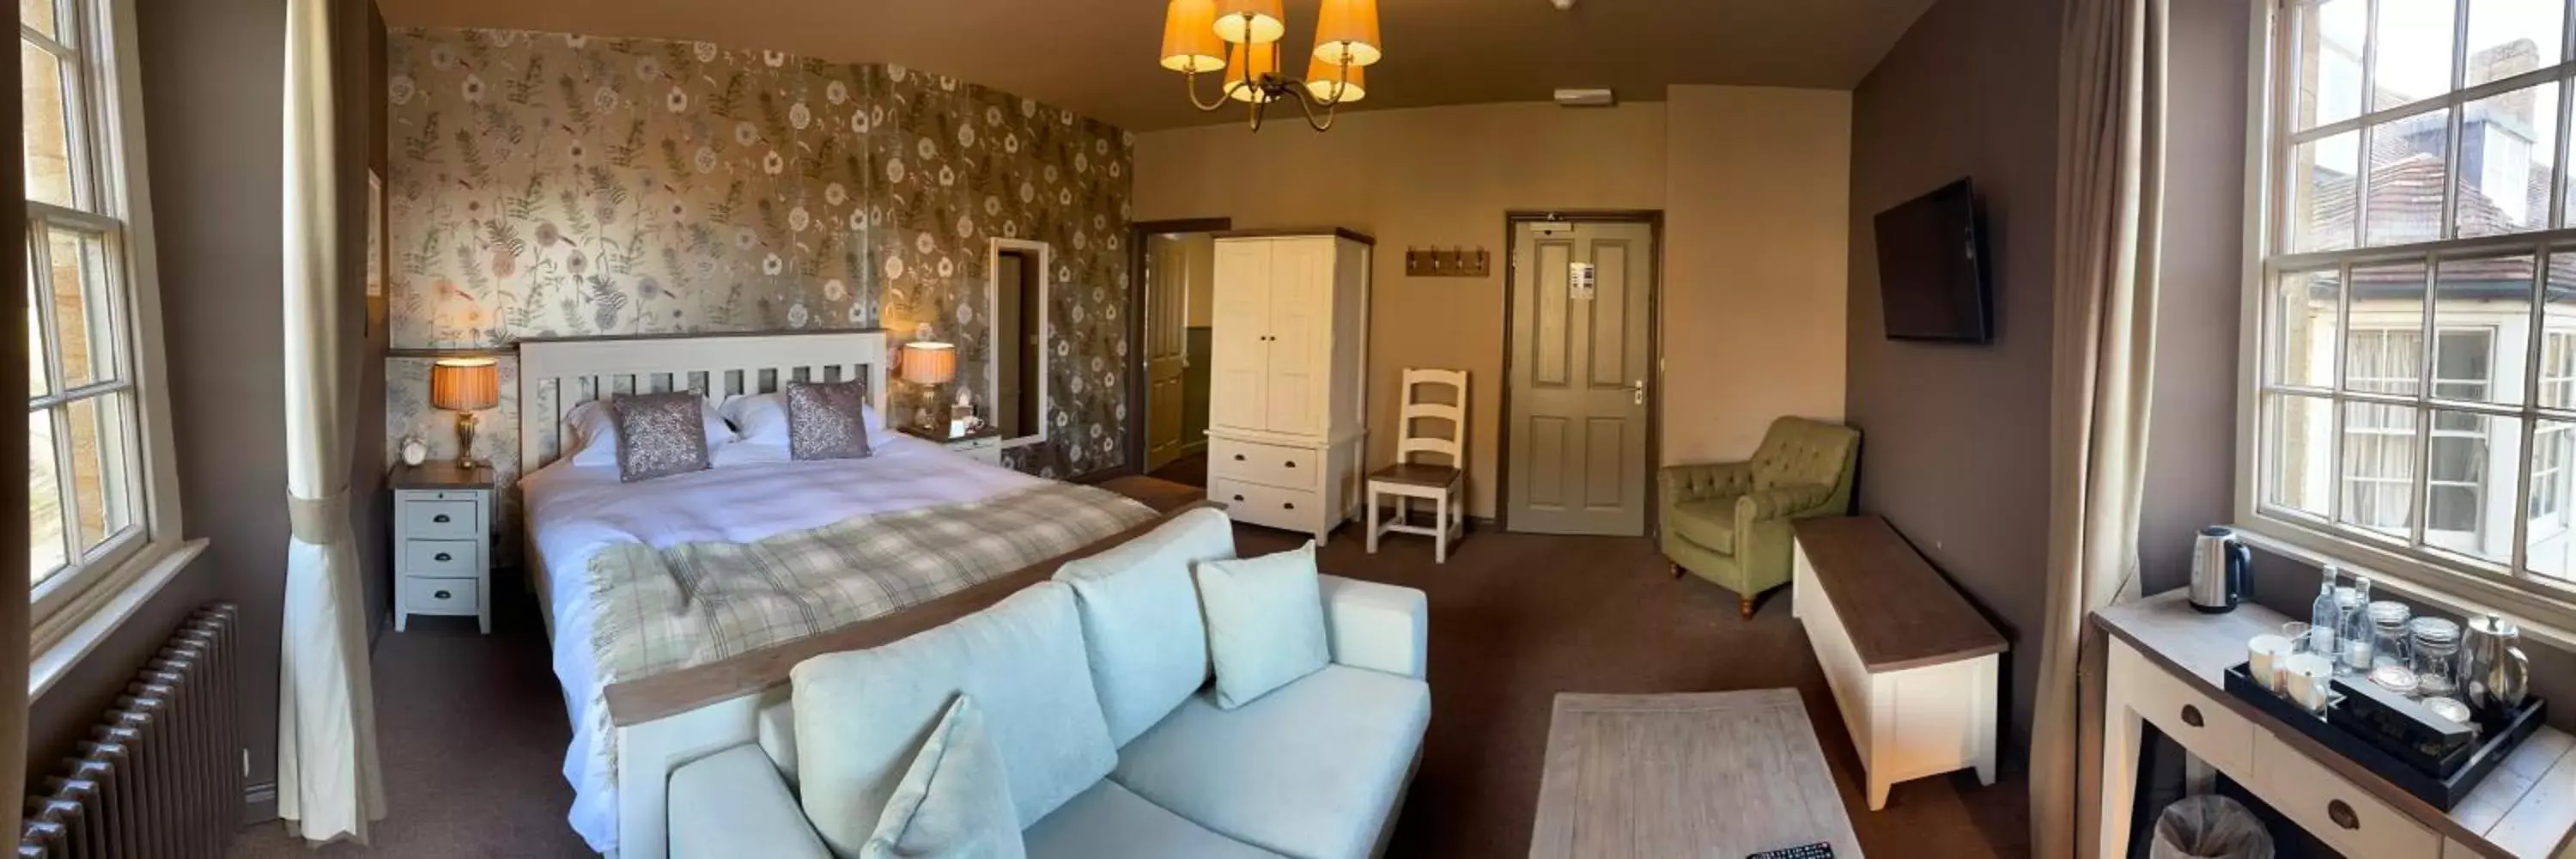 Deluxe Quadruple Room in The Plume of Feathers